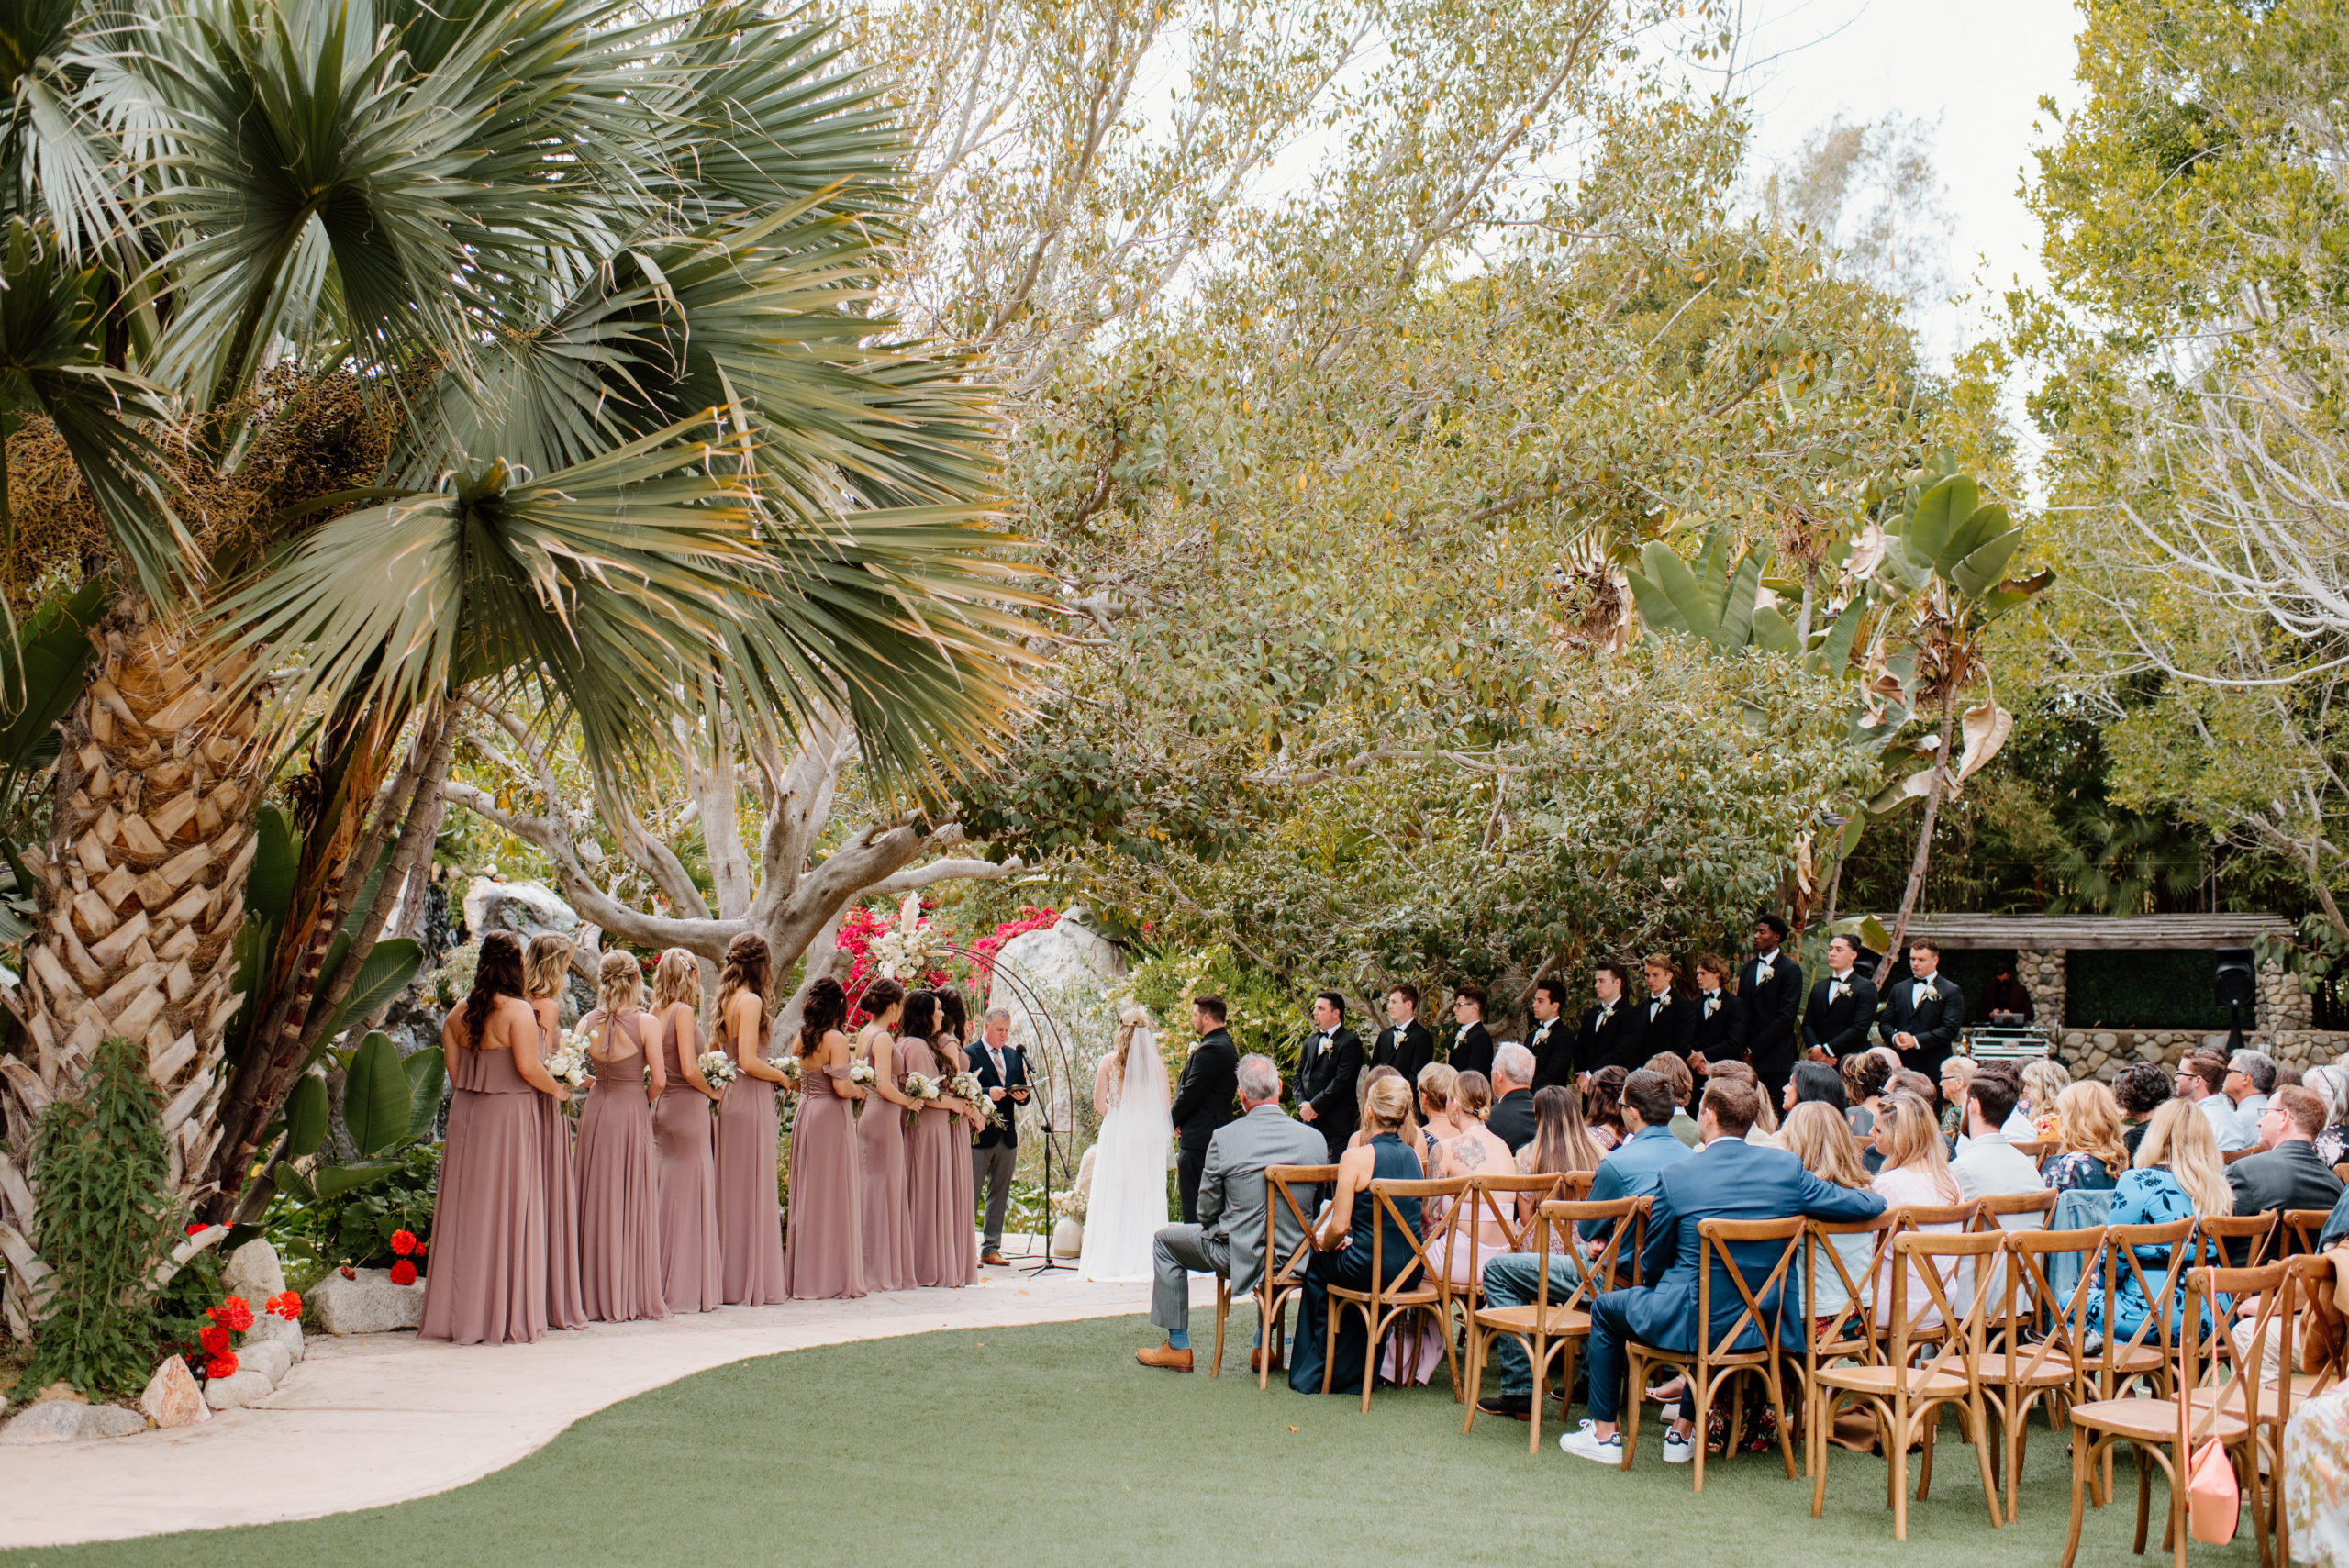 A wide photograph of Brooke and Jayden's wedding ceremony at the Botanica Oceanside.